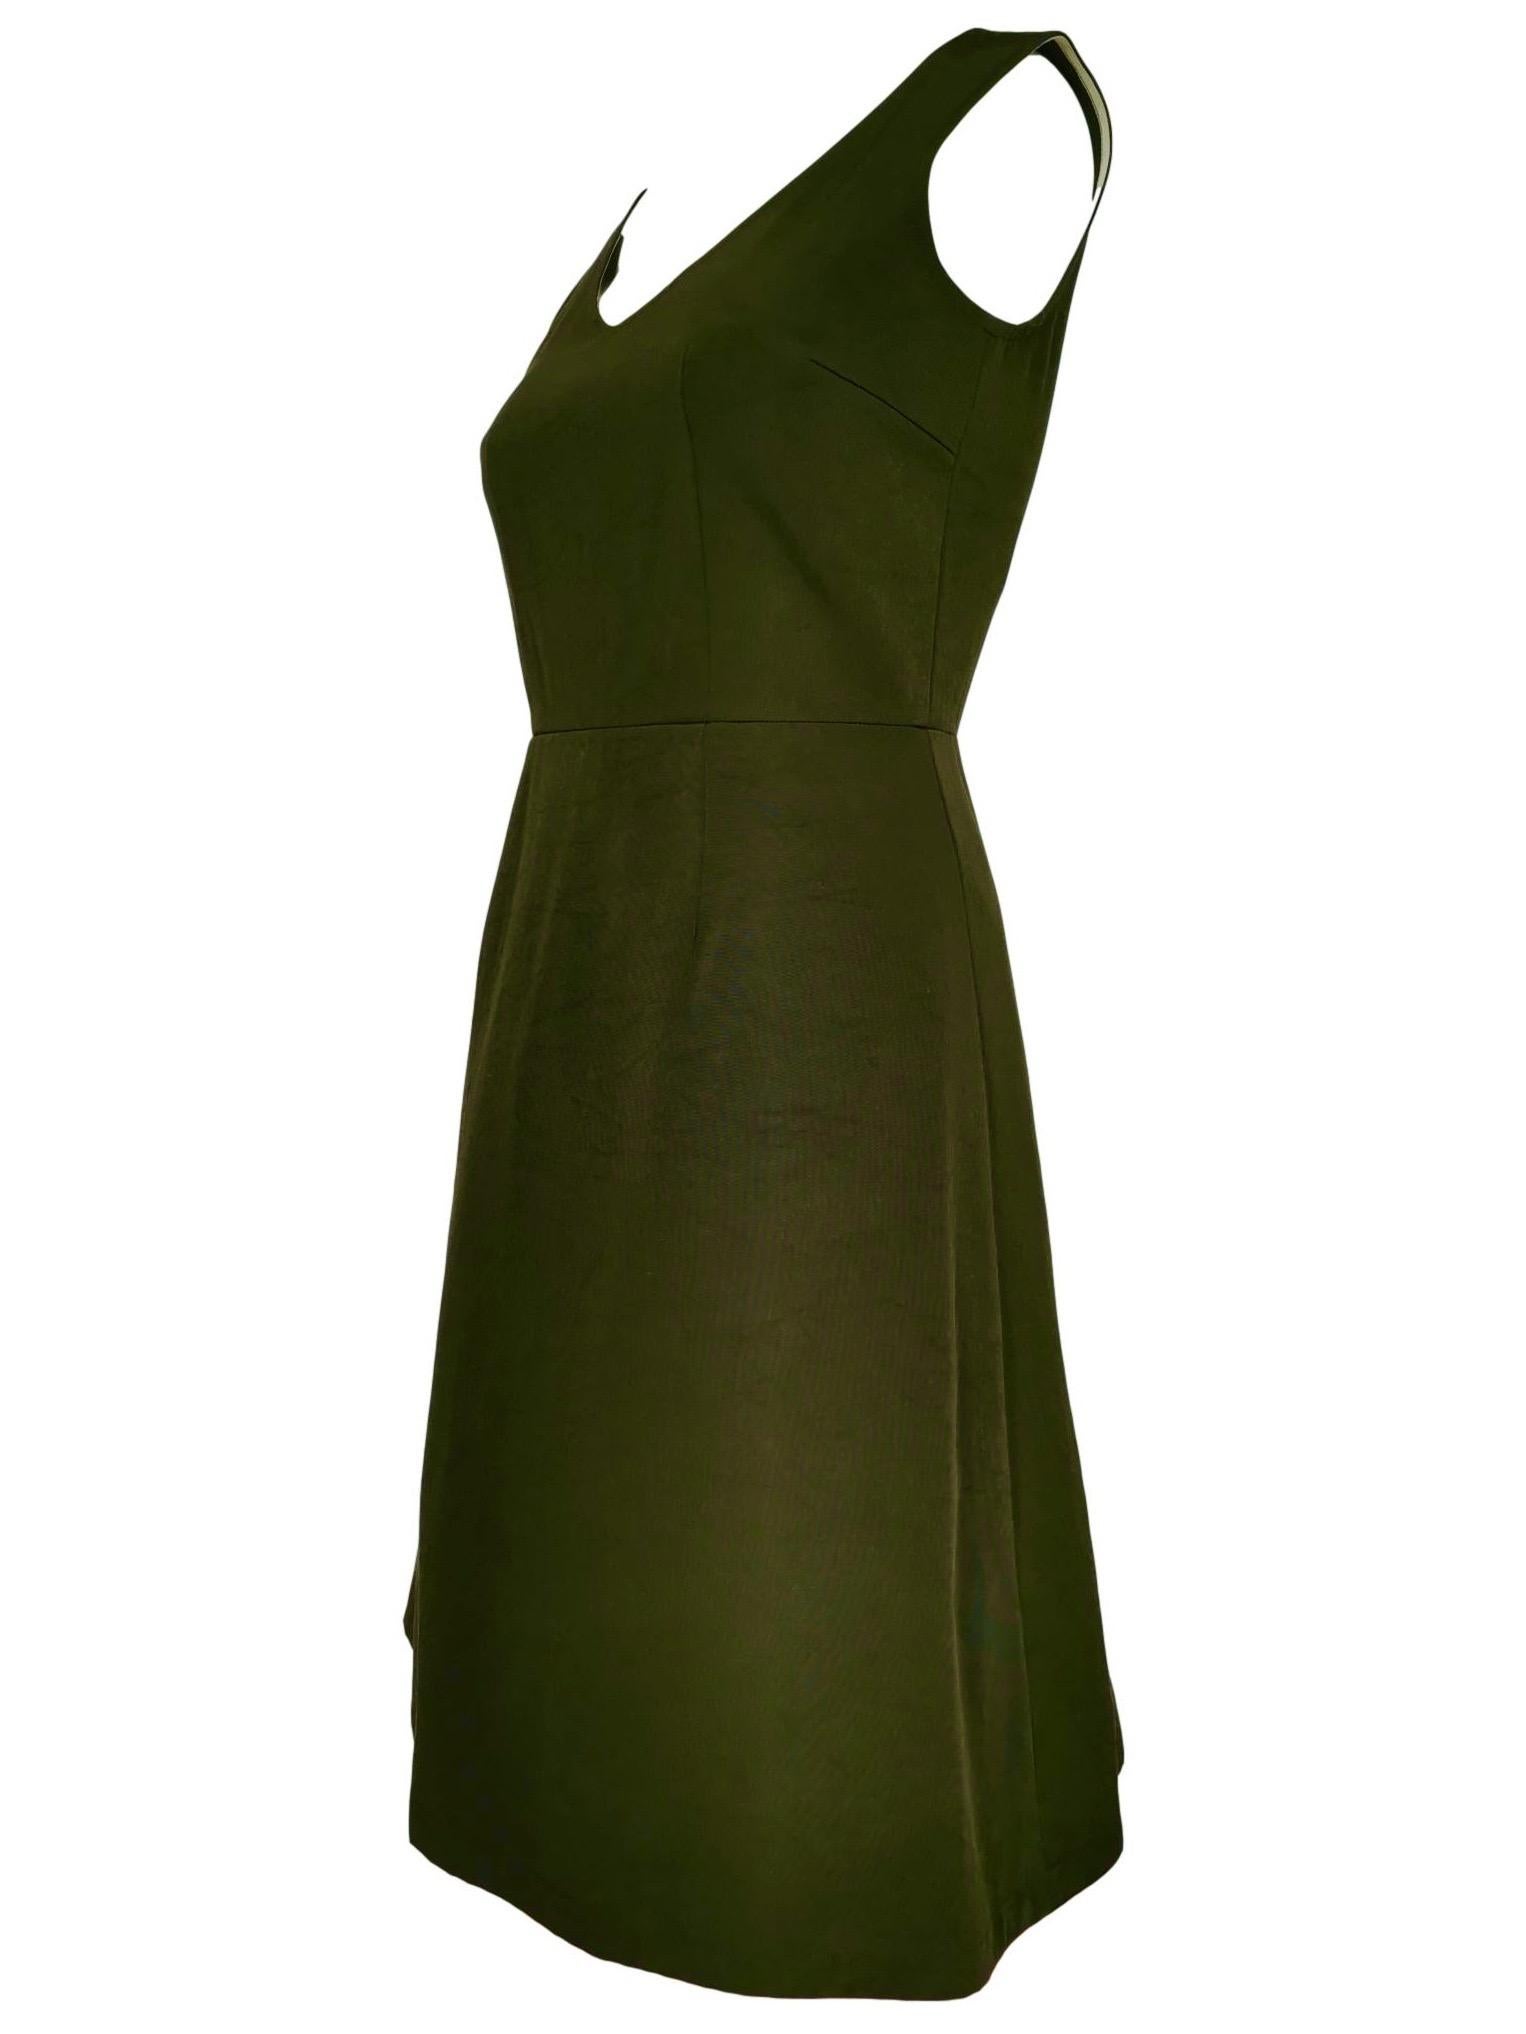 Women's Comme des Garcons Army Green Dress AD 1999 For Sale